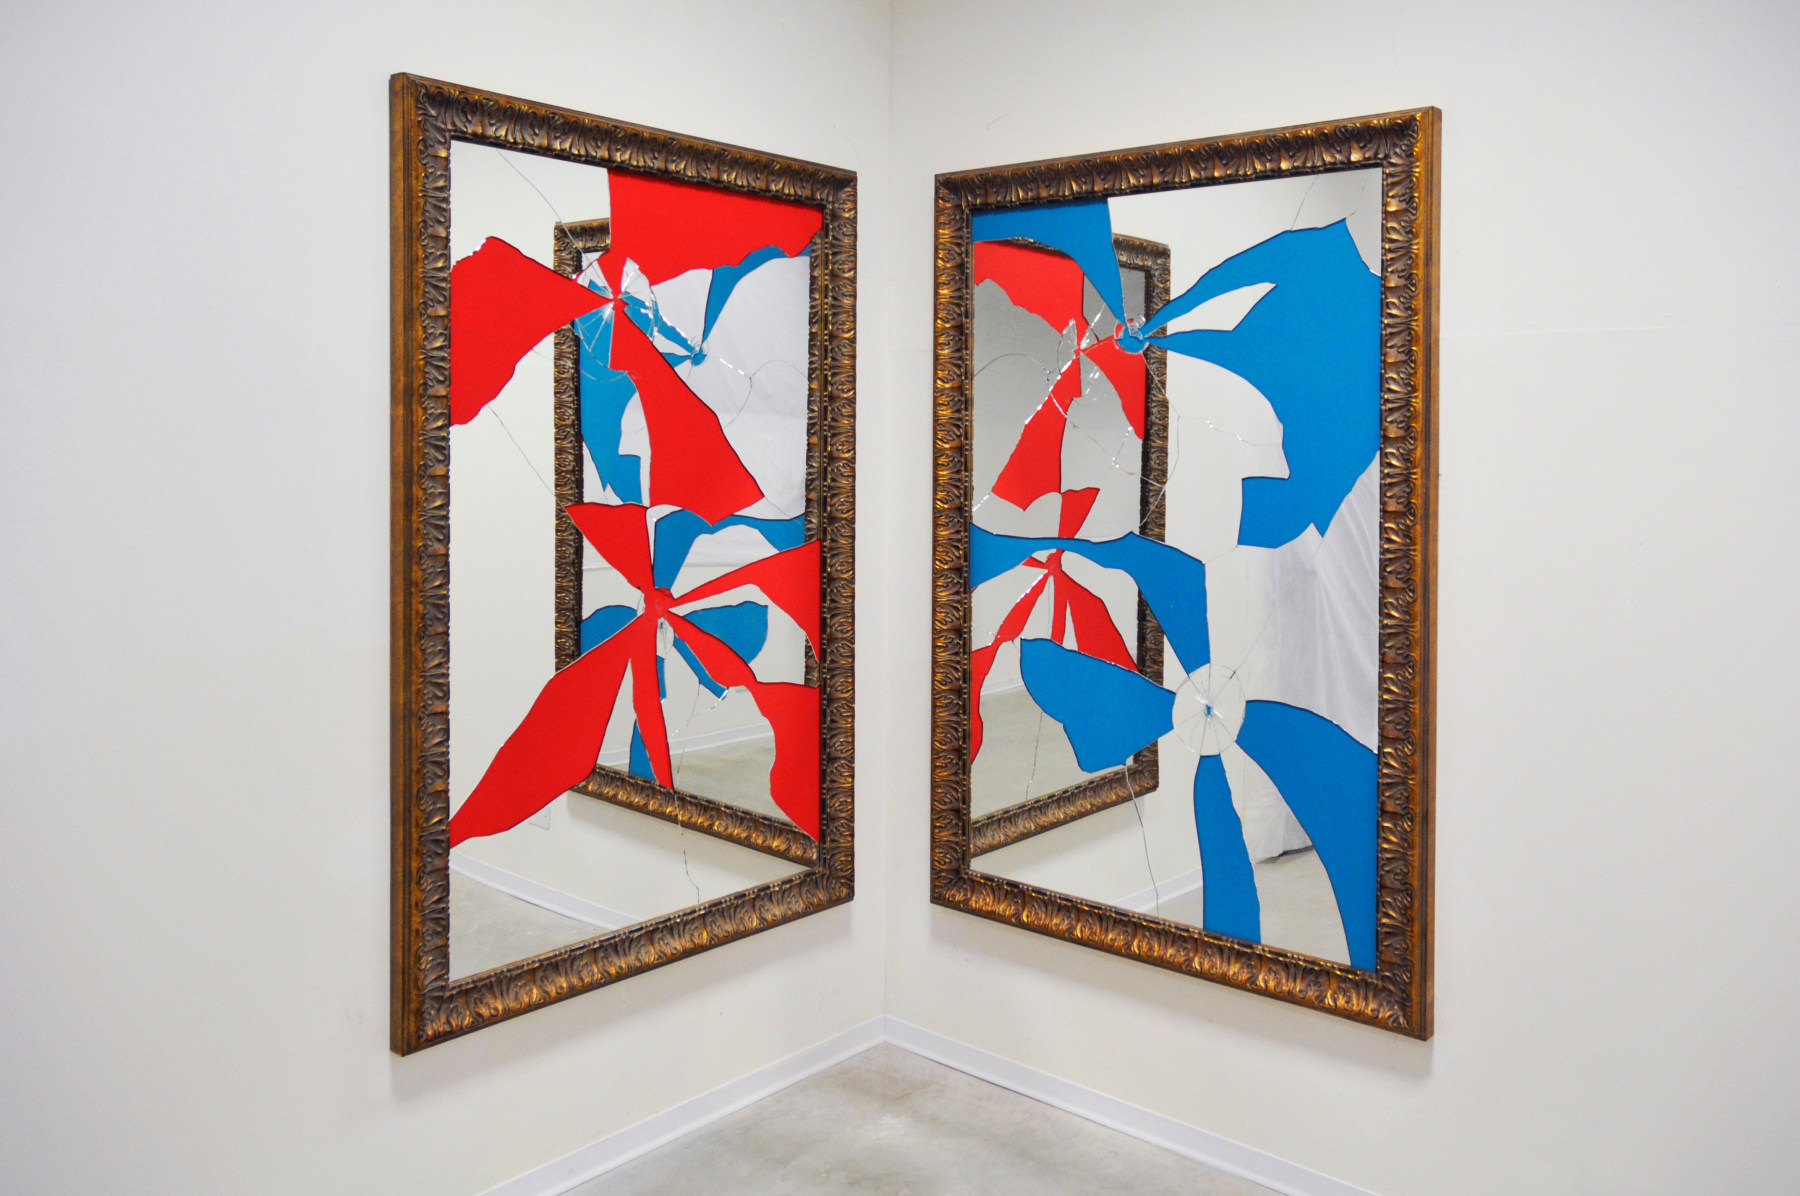 Two Less One Colored, 2015, Mirror, gilded wood